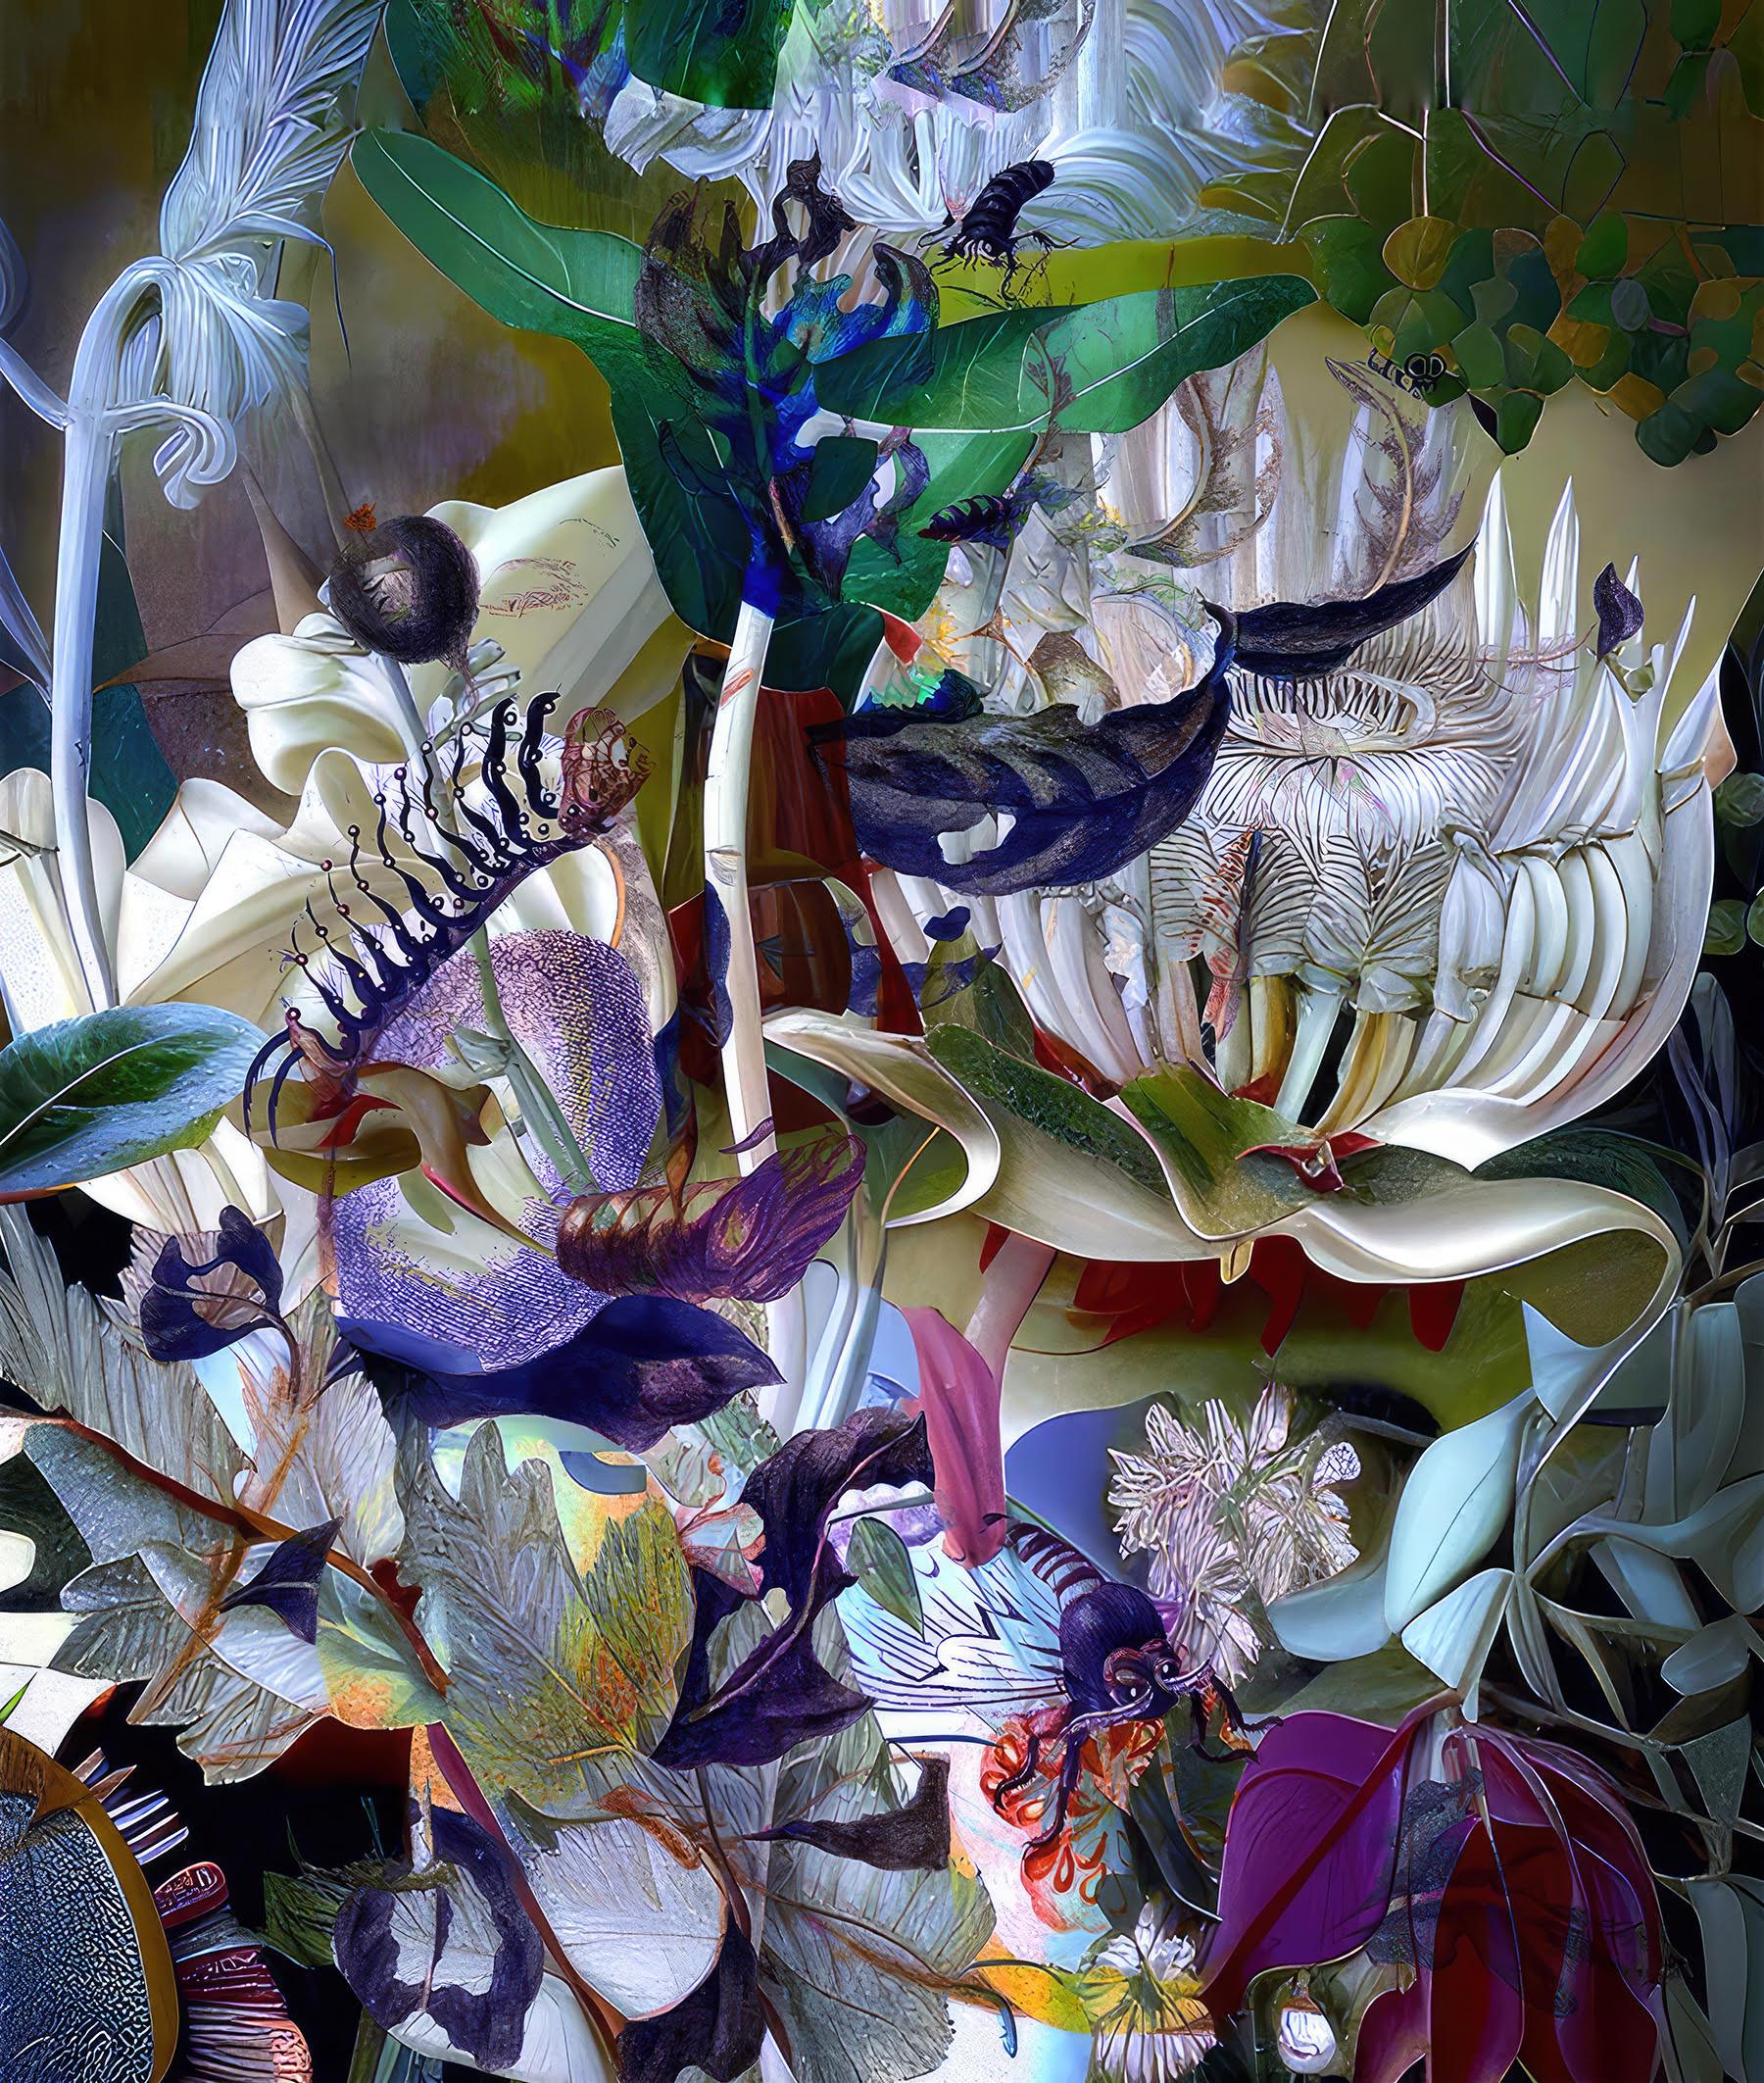 'The Garden Sings' 2023 by Carol Bouyoucos. Archival print, Digital photomontage, Ed. of 10. Image: 17 x 13 in. / Paper: 24 x 20 in. / Frame: 25.25 x 21.25 in. This manipulated photomontage features a closeup view of flowers and various